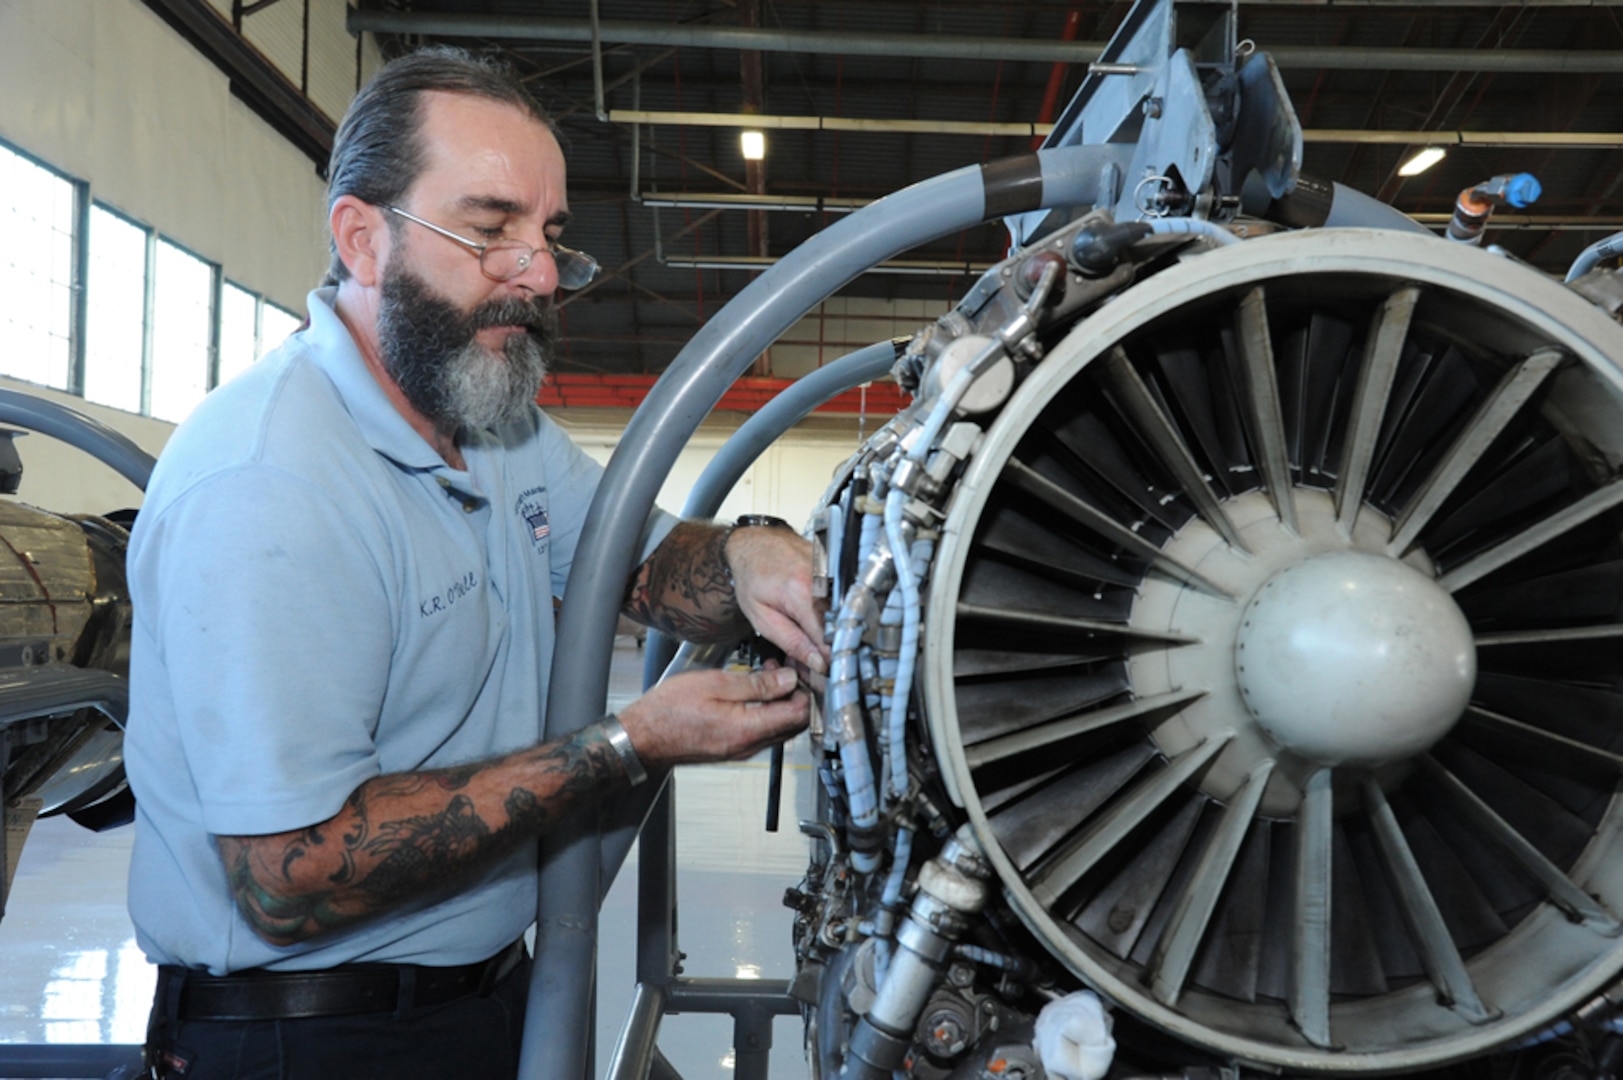 Kevin O'Dell, 12th Flying Training Wing maintenance division aircraft mechanic, repairs an engine from a T-38 Talon aircraft during a phase inspection Nov. 18 at Joint Base San Antonio-Randolph. (U.S. Air Force photo by Rich McFadden)